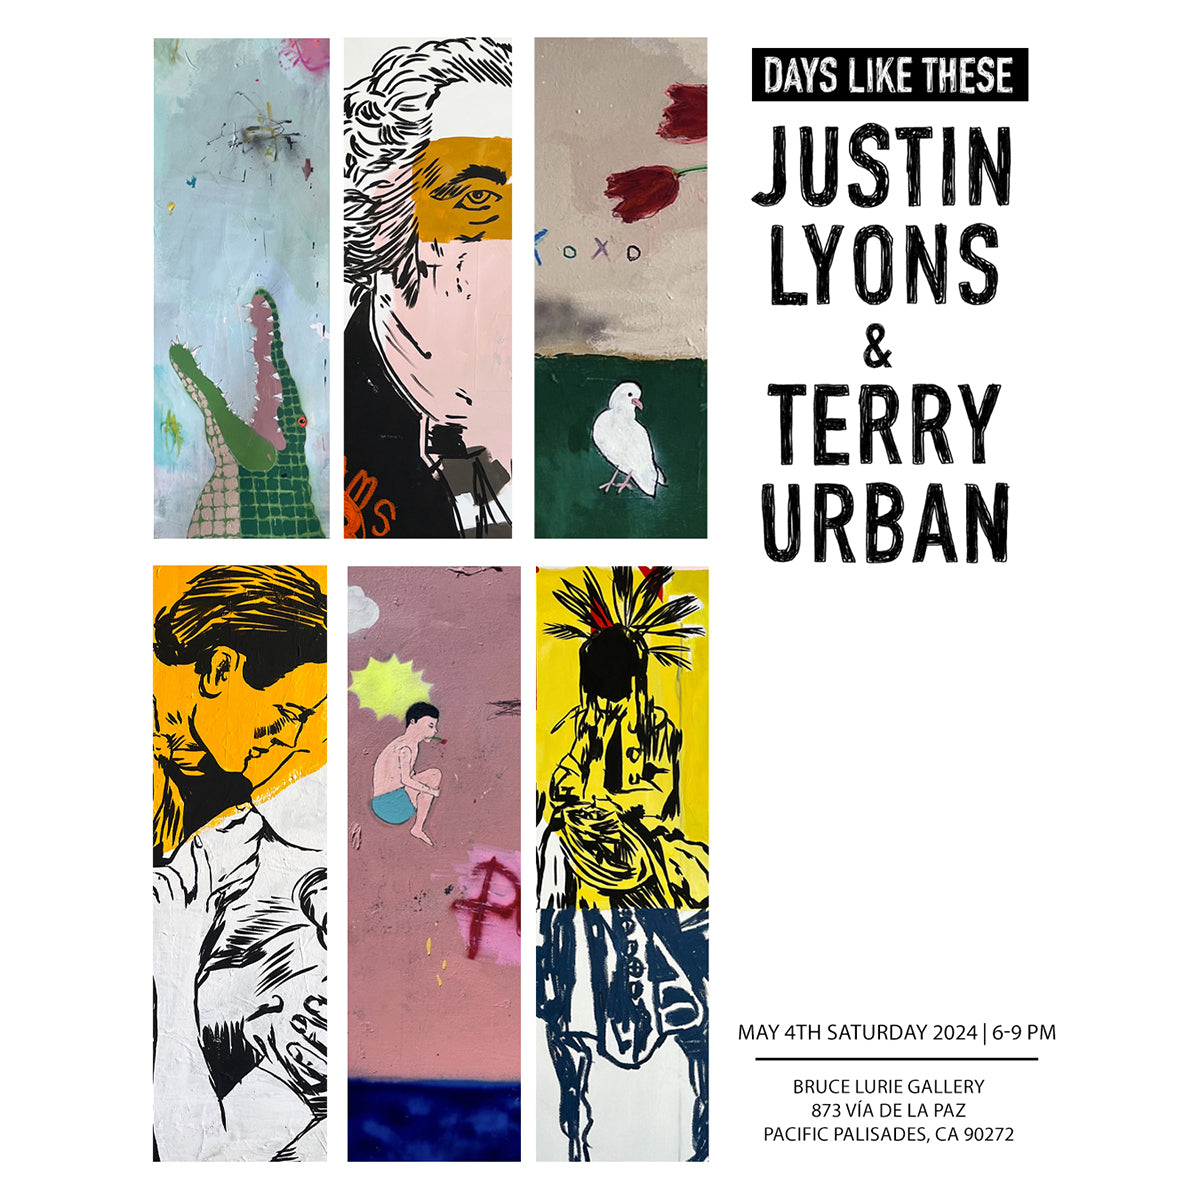 Terry Urban & Justin Lyons: "Days Like These" Exhibit at Bruce Lurie Gallery, CA